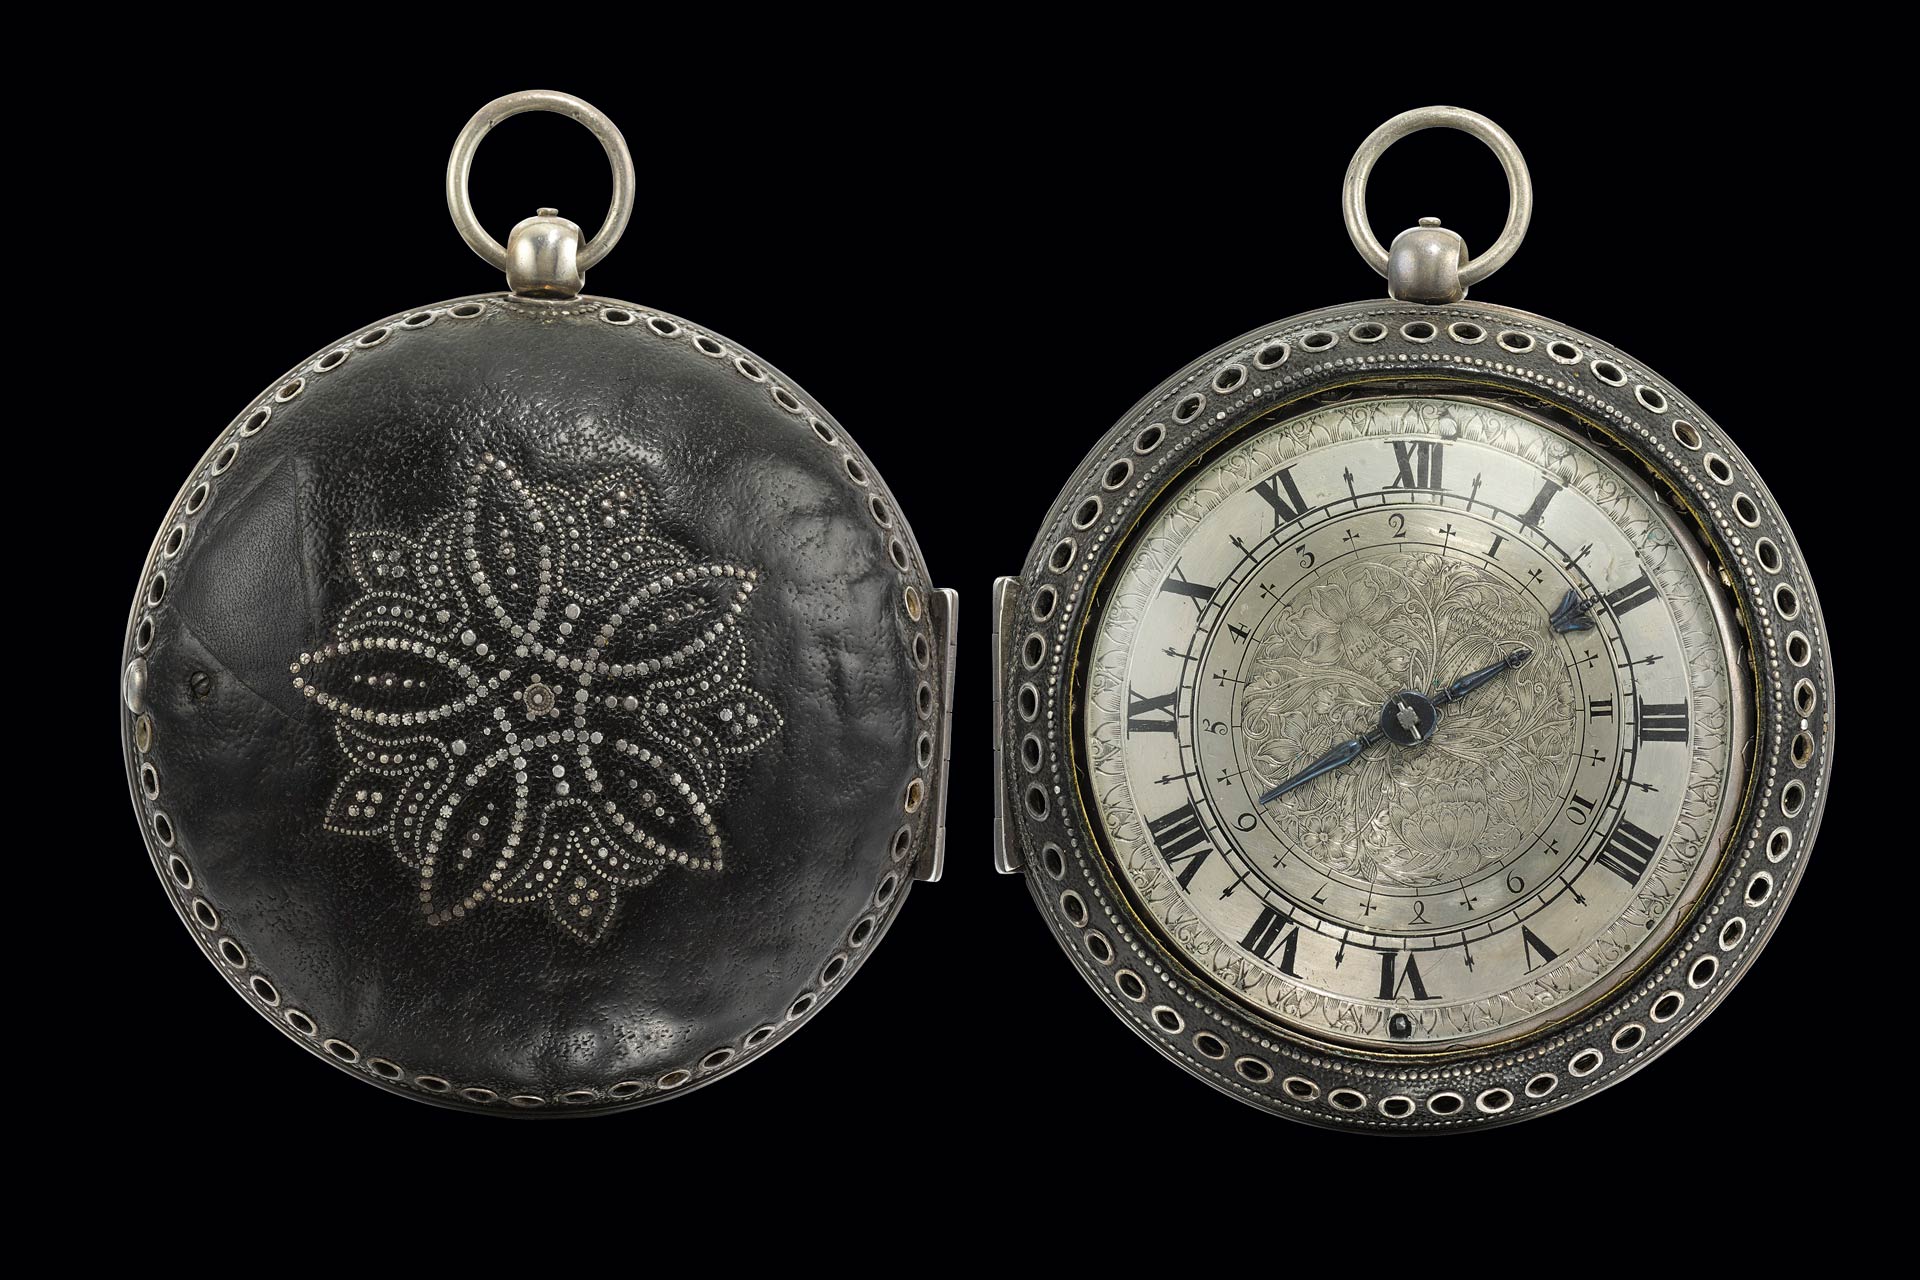 Lot 2: Edward East A VERY RARE SILVER HOUR STRIKING COACH WATCH WITH ALARM AND LEATHER OUTER PROTECTIVE CASE CIRCA 1655